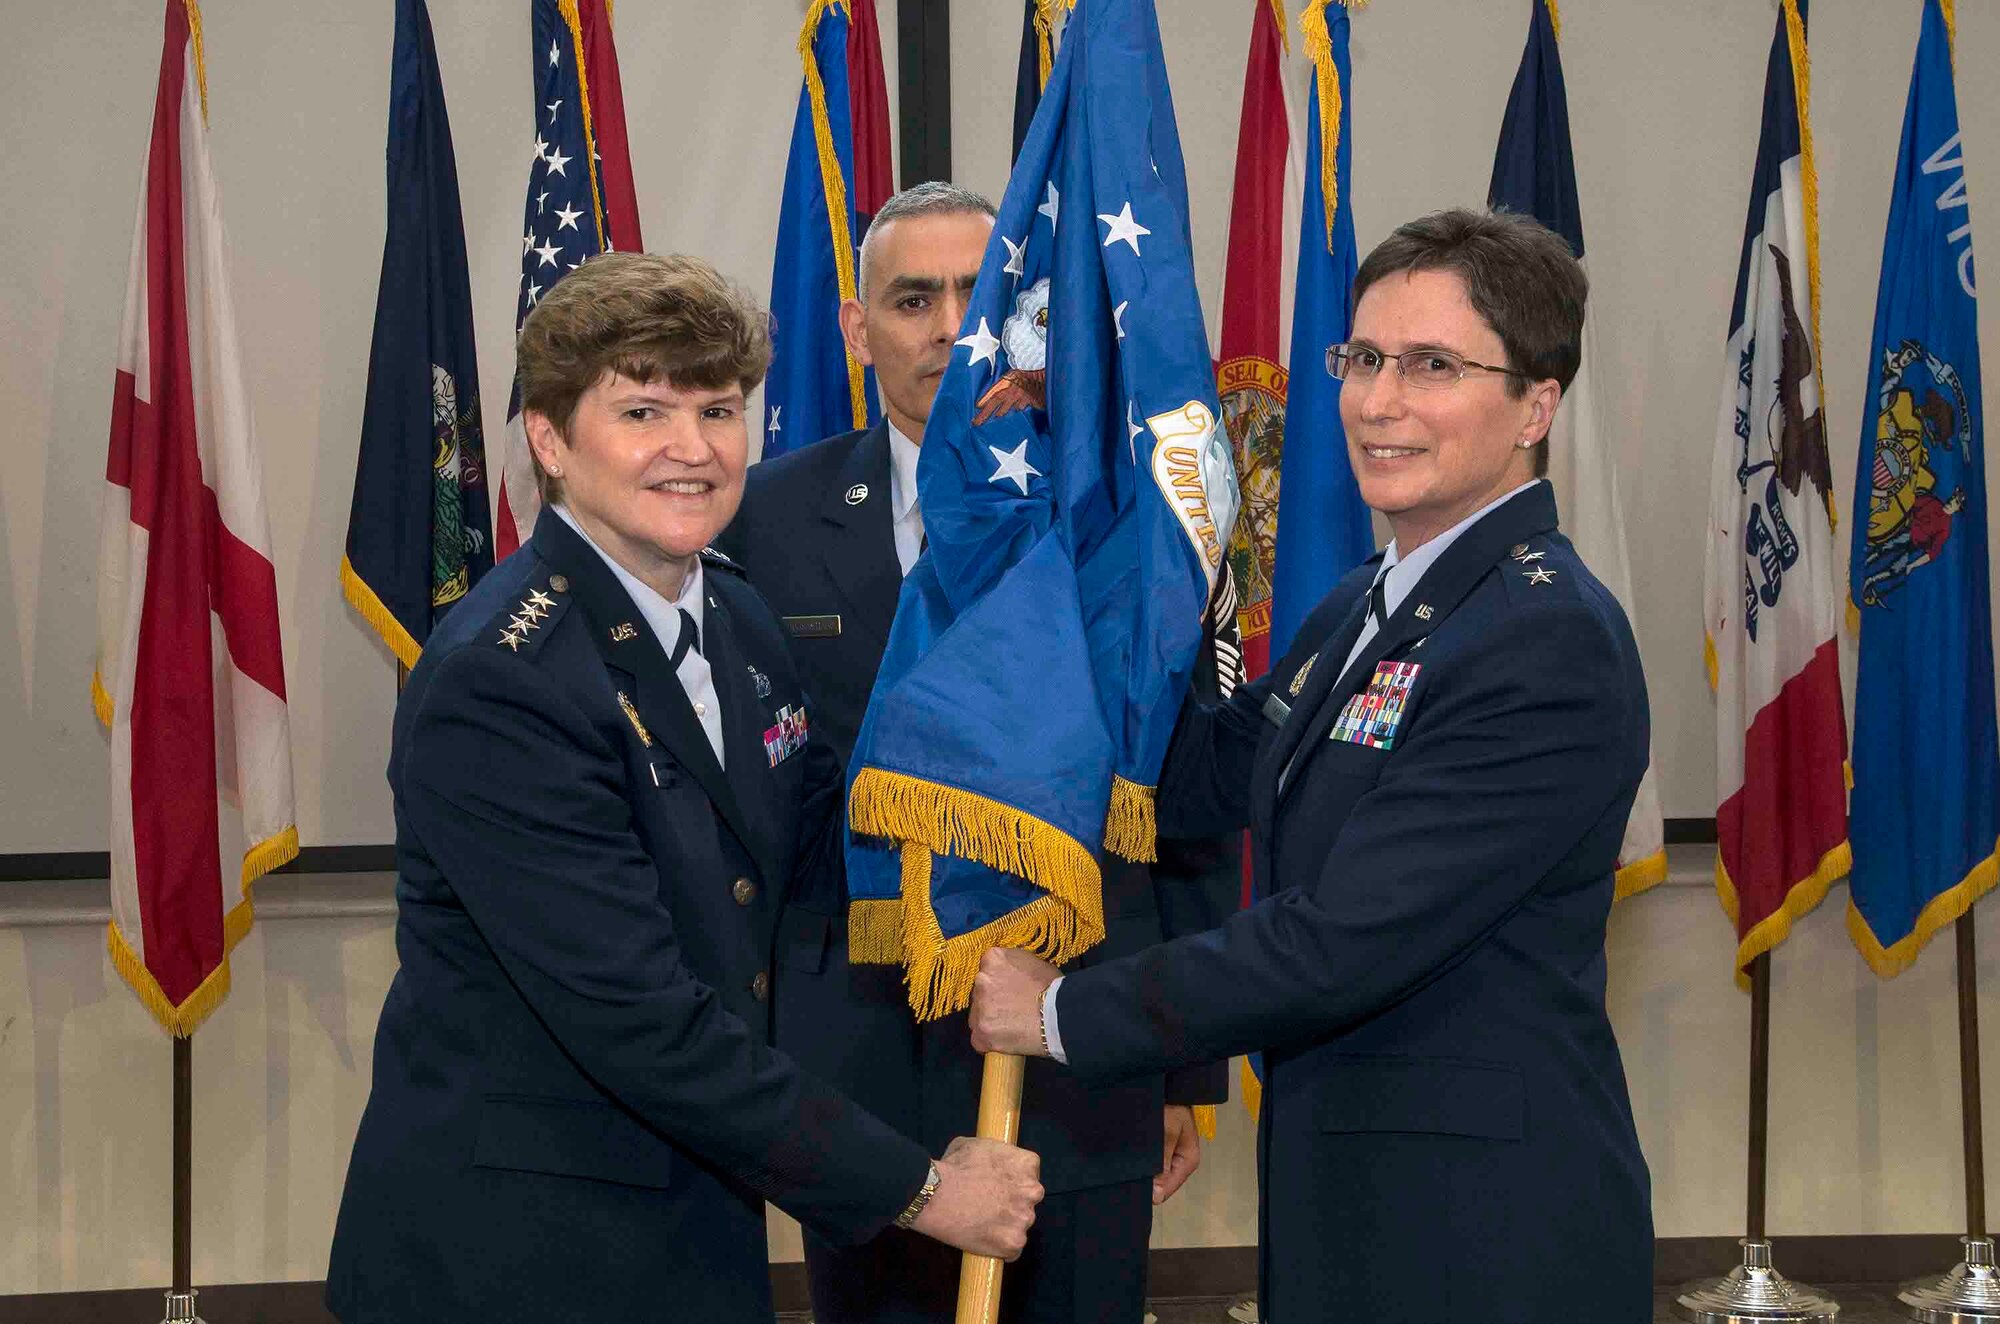 Gen. Janet C. Wolfenbarger, commander of Air Force Materiel Command, passes the Air Force flag that represents the future AFIMSC flag to Maj. Gen. Theresa C. Carter to officially activate the Air Force Installation and Mission Support Center May 5, 2015, at Joint Base San Antonio-Lackland, Texas. AFIMSC, commanded by Carter, serves as a single intermediate-level headquarters for the delivery of installation support capabilities throughout the Air Force and reports to Air Force Materiel Command. AFIMSC is the parent organization for several field operating units to include the Air Force Security Forces Center, Air Force Civil Engineer Center, Air Force Installation Contracting Agency, Air Force Financial Management Center of Expertise, Air Force Financial Services Center and Air Force Services Activity. The new center also administers several other installation and mission support functions such as chaplain services, logistics readiness and base communications. (U.S. Air Force photo by Johnny Saldivar/released)